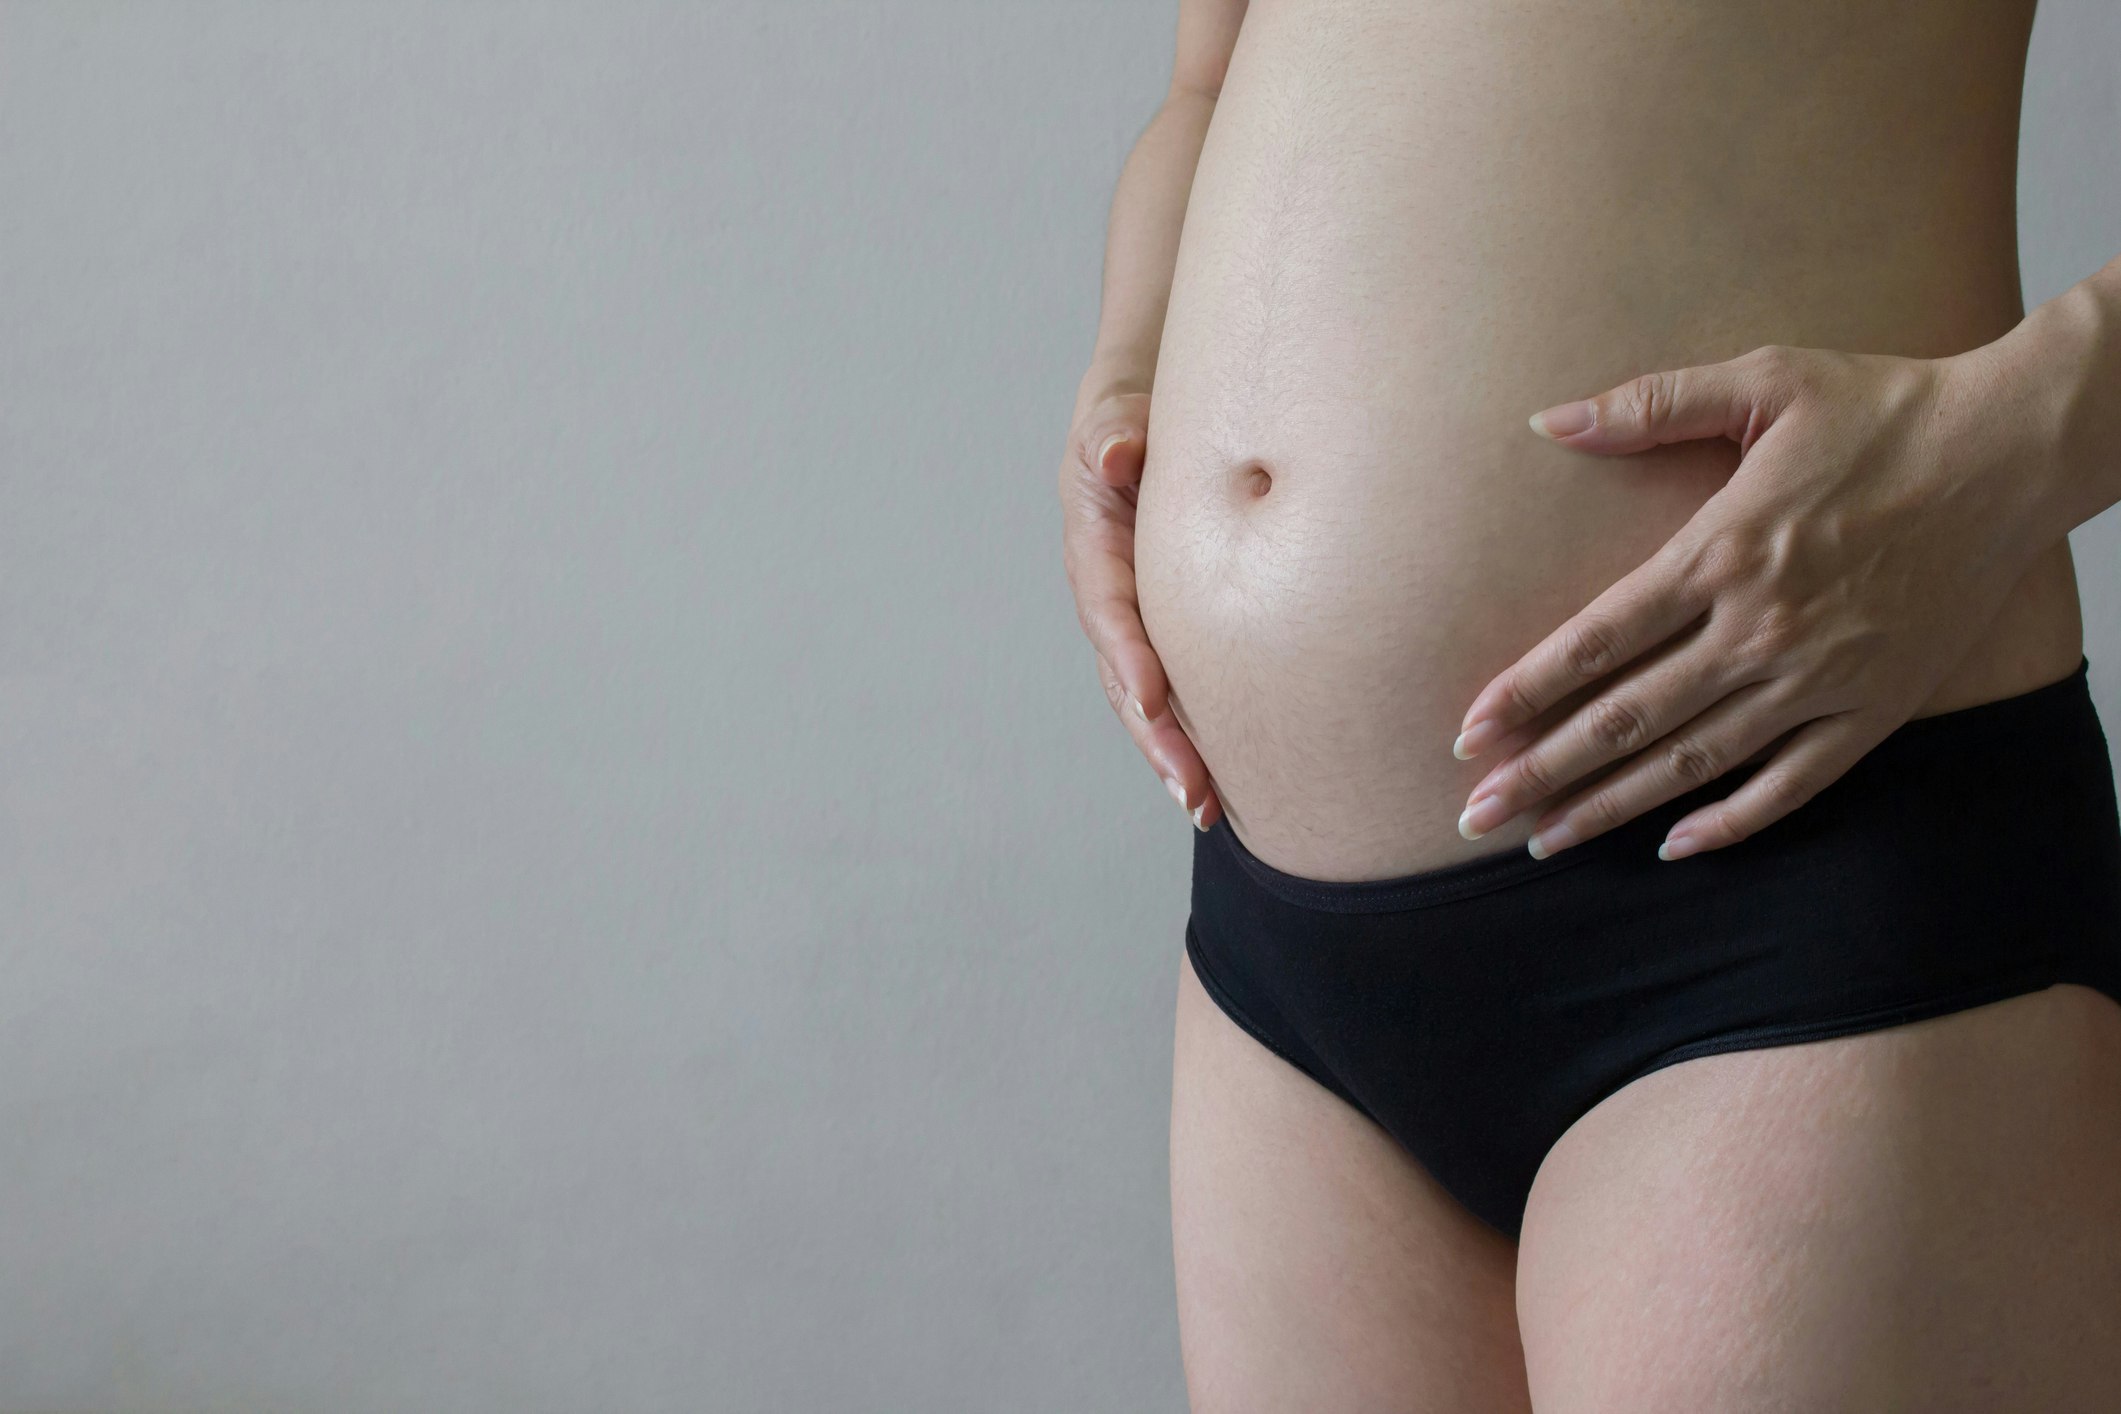 Is It Wrong to Directly Ask a Woman About Her Baby Bump?